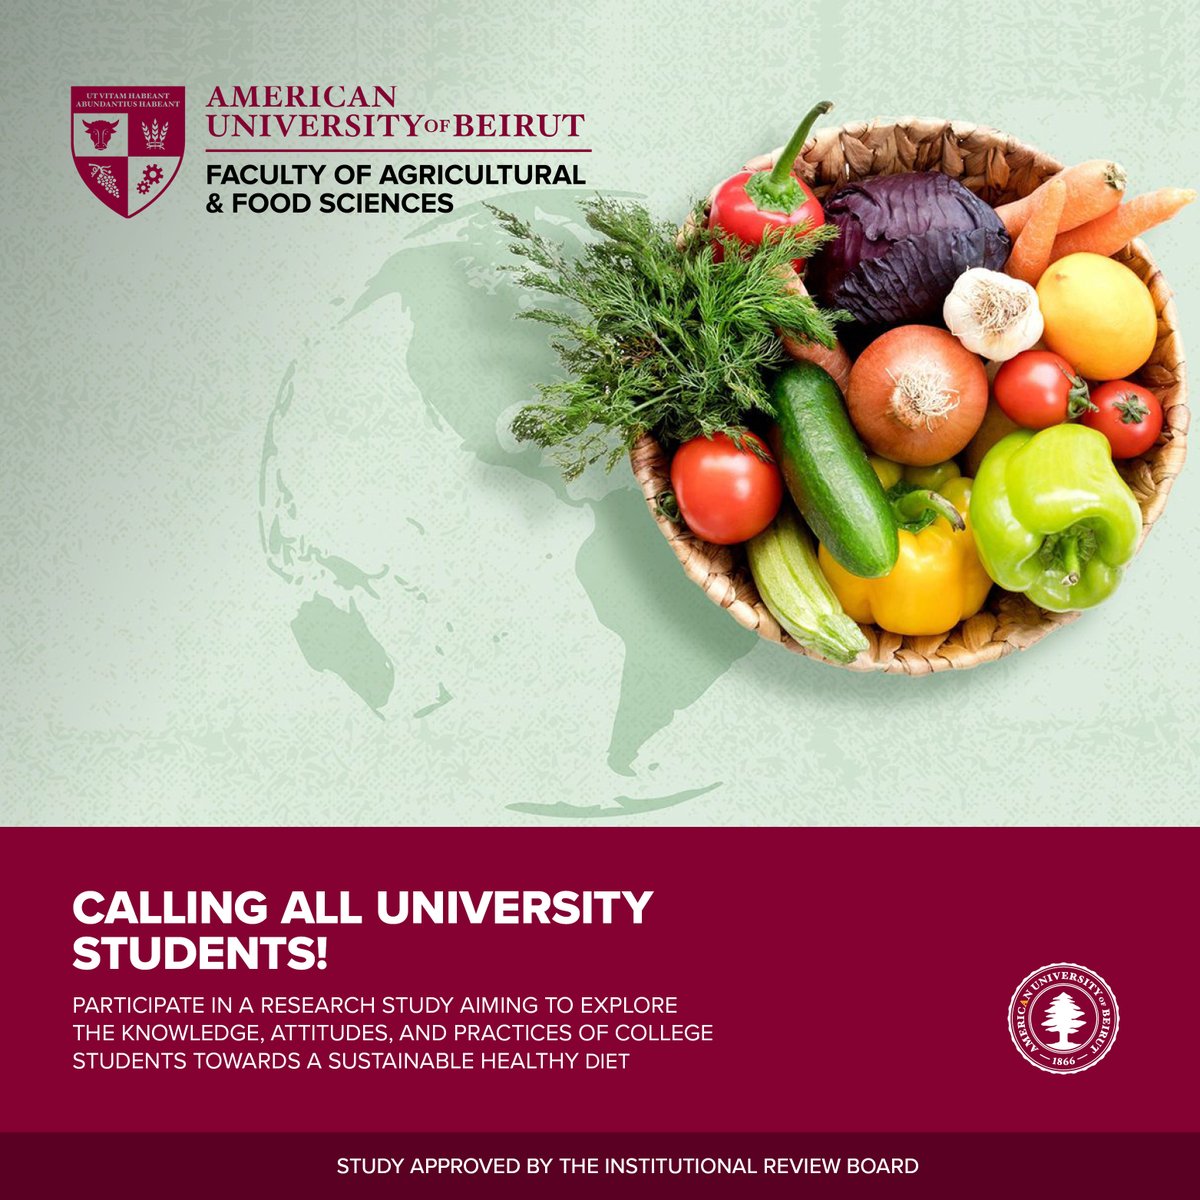 Are you a university student in Lebanon, aged 18 to 25? We need your insights on Sustainable Healthy diets. Participate in our research & help us by filling this survey:🔗bitly.ws/3fewi ✅Takes only 10 minutes ✅Available in English & Arabic ✅All responses are anonymous